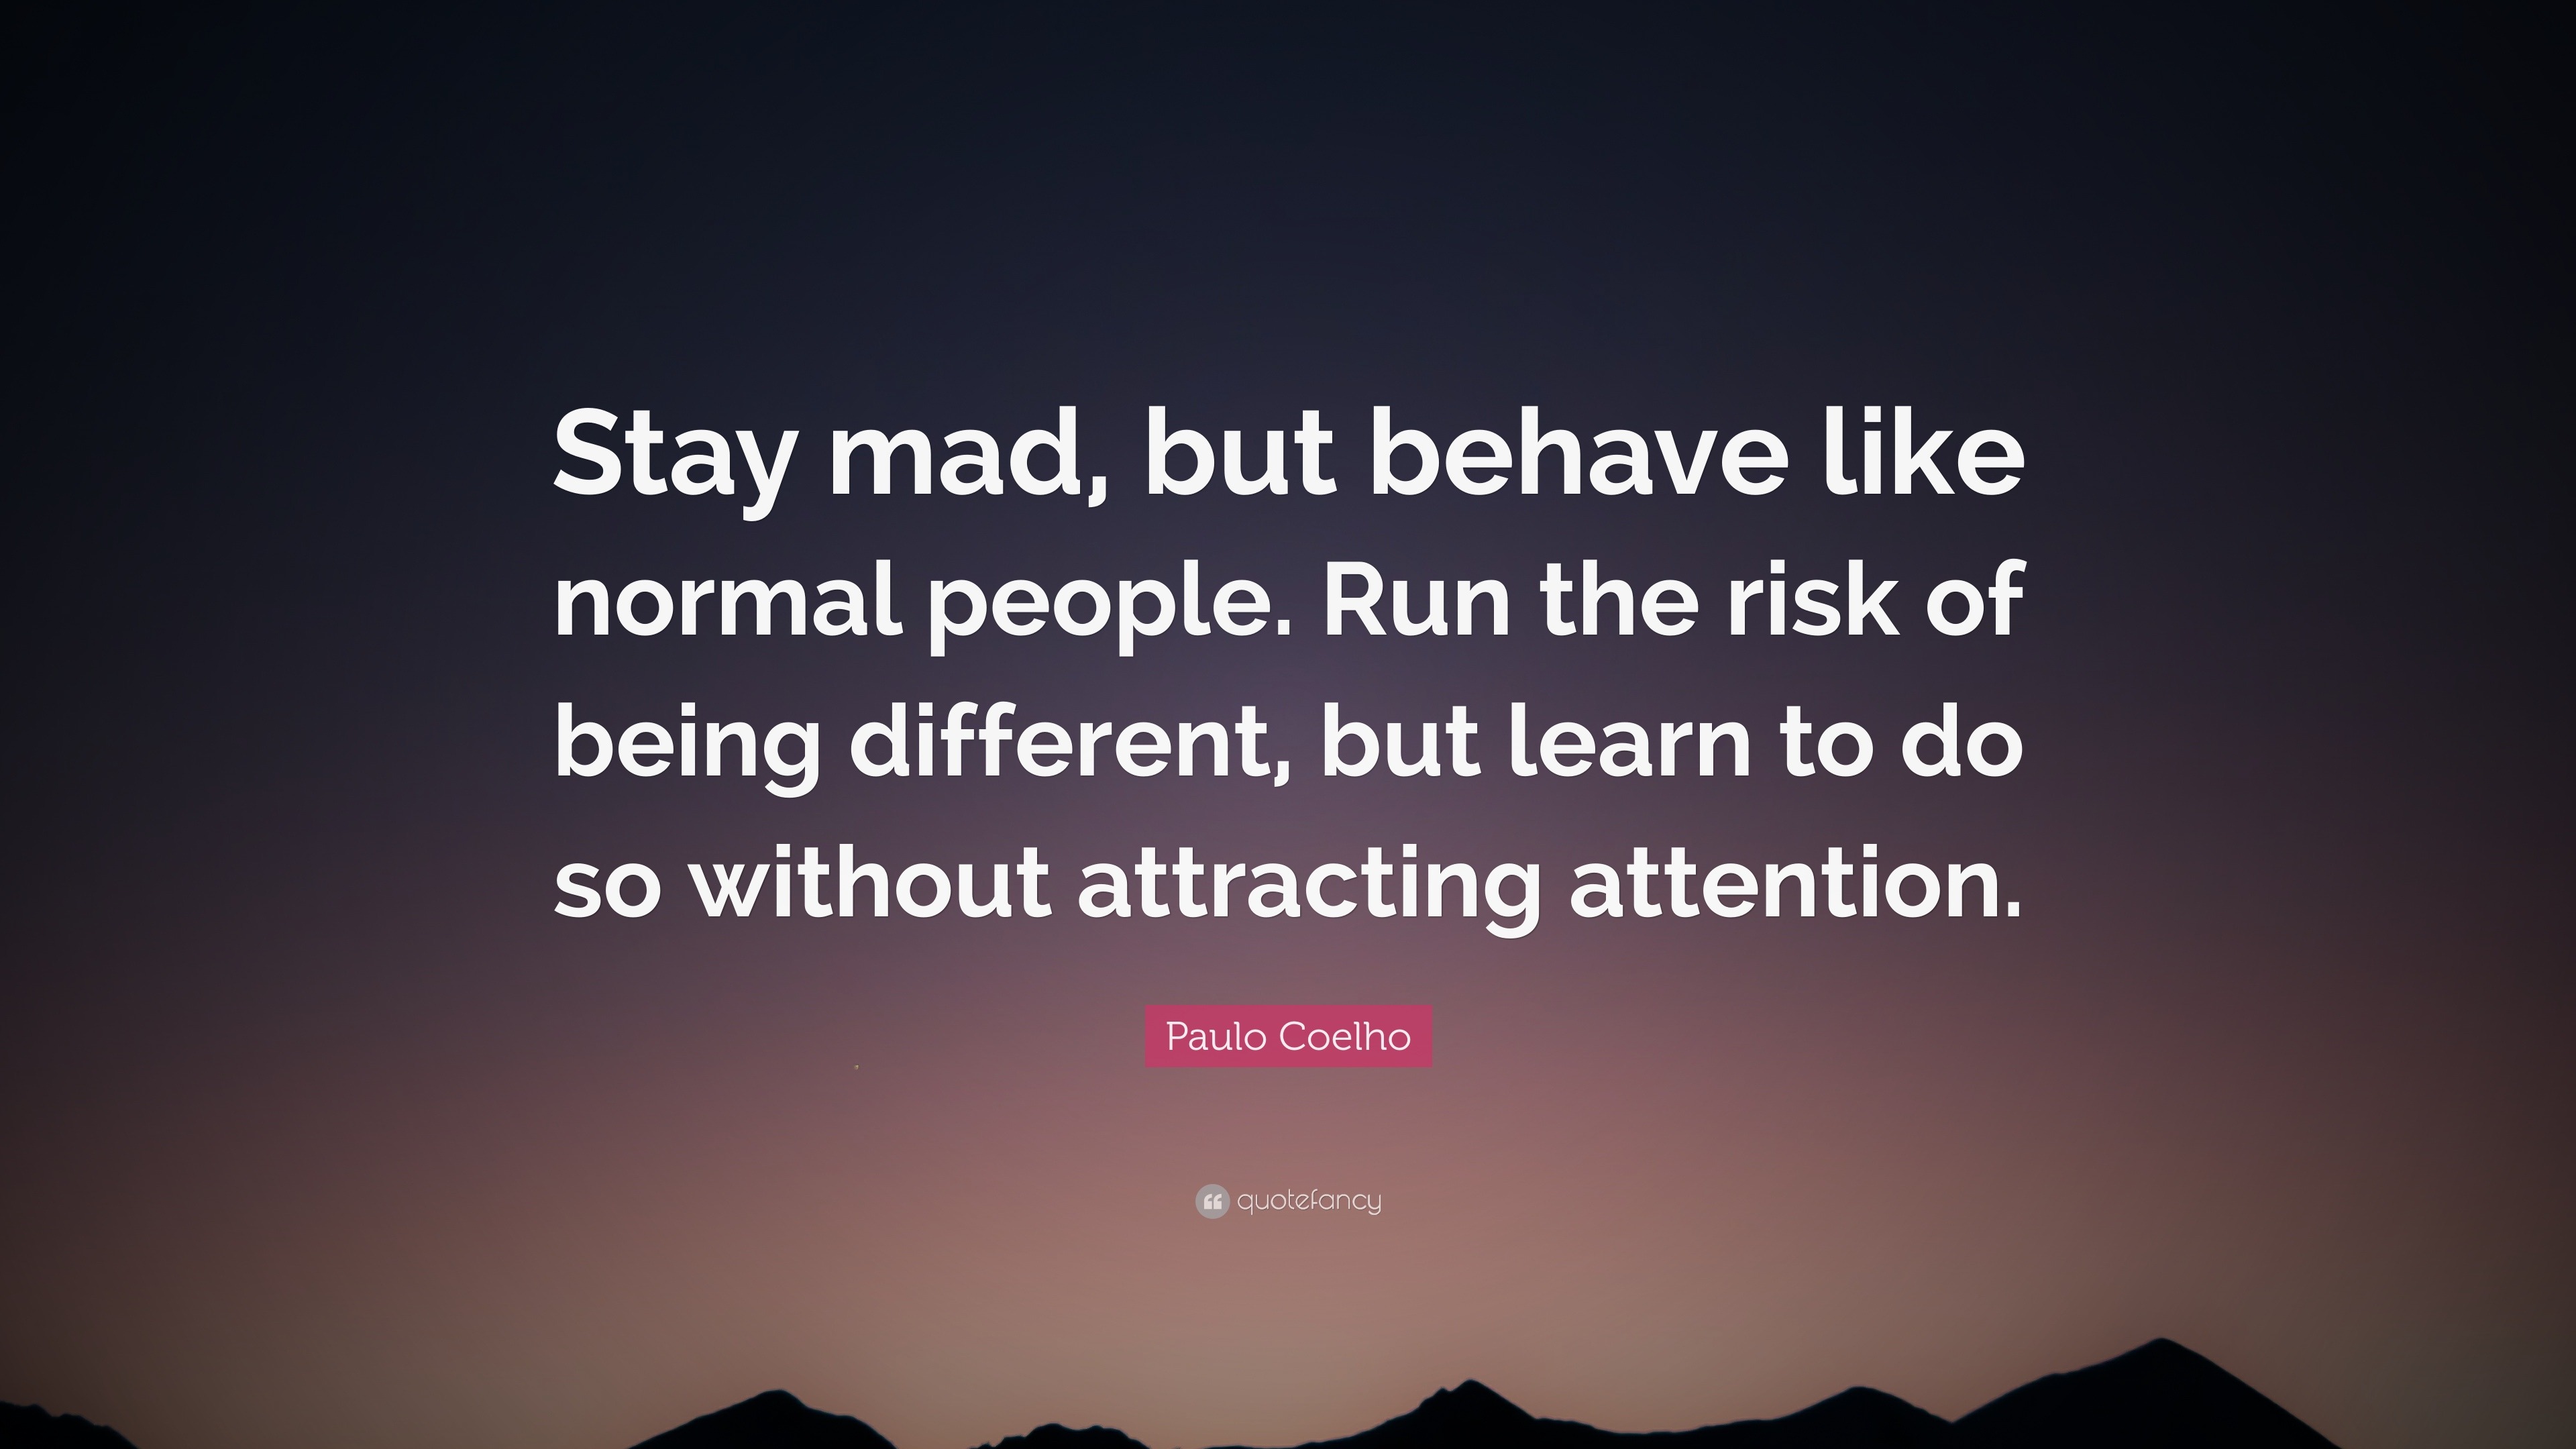 paulo coelho quote: "stay mad, but behave like normal people.